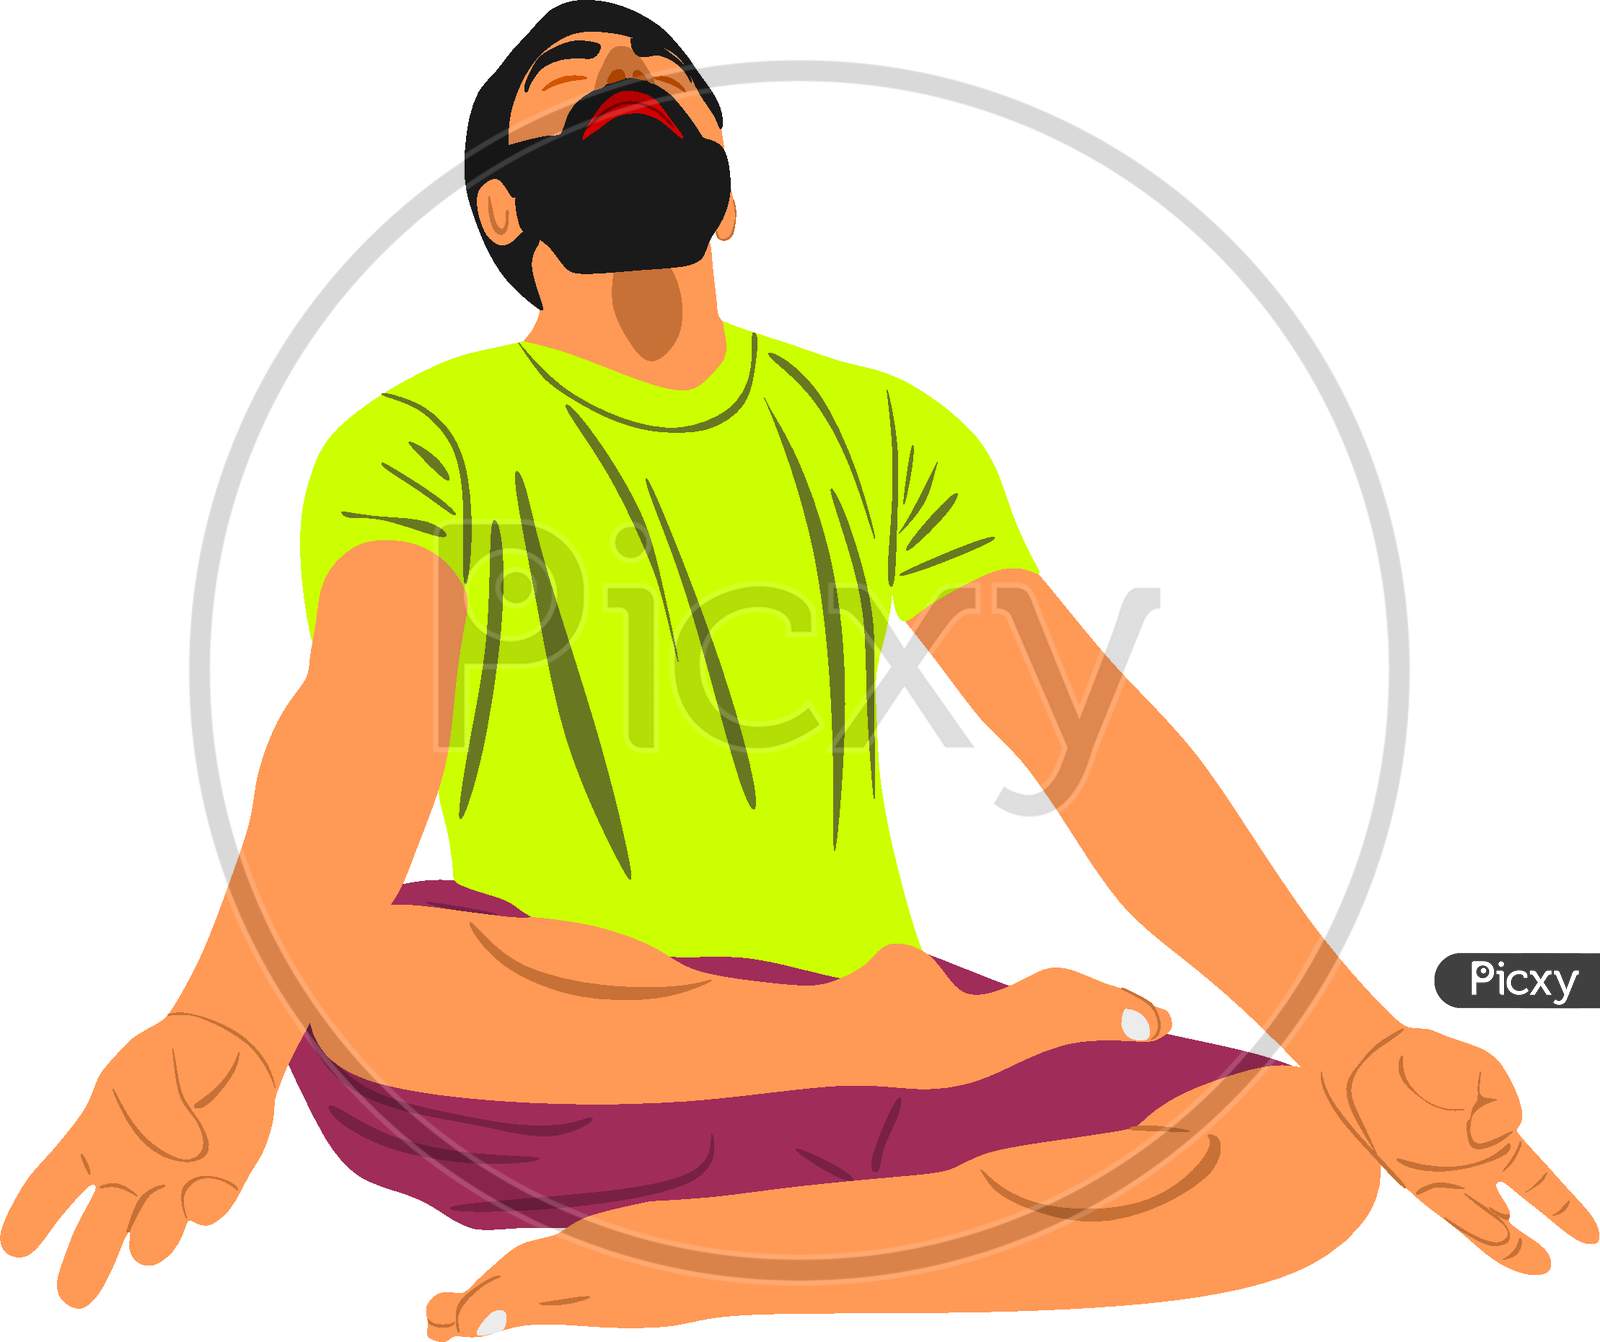 Indian Health And Fitness Cartoon Illustration